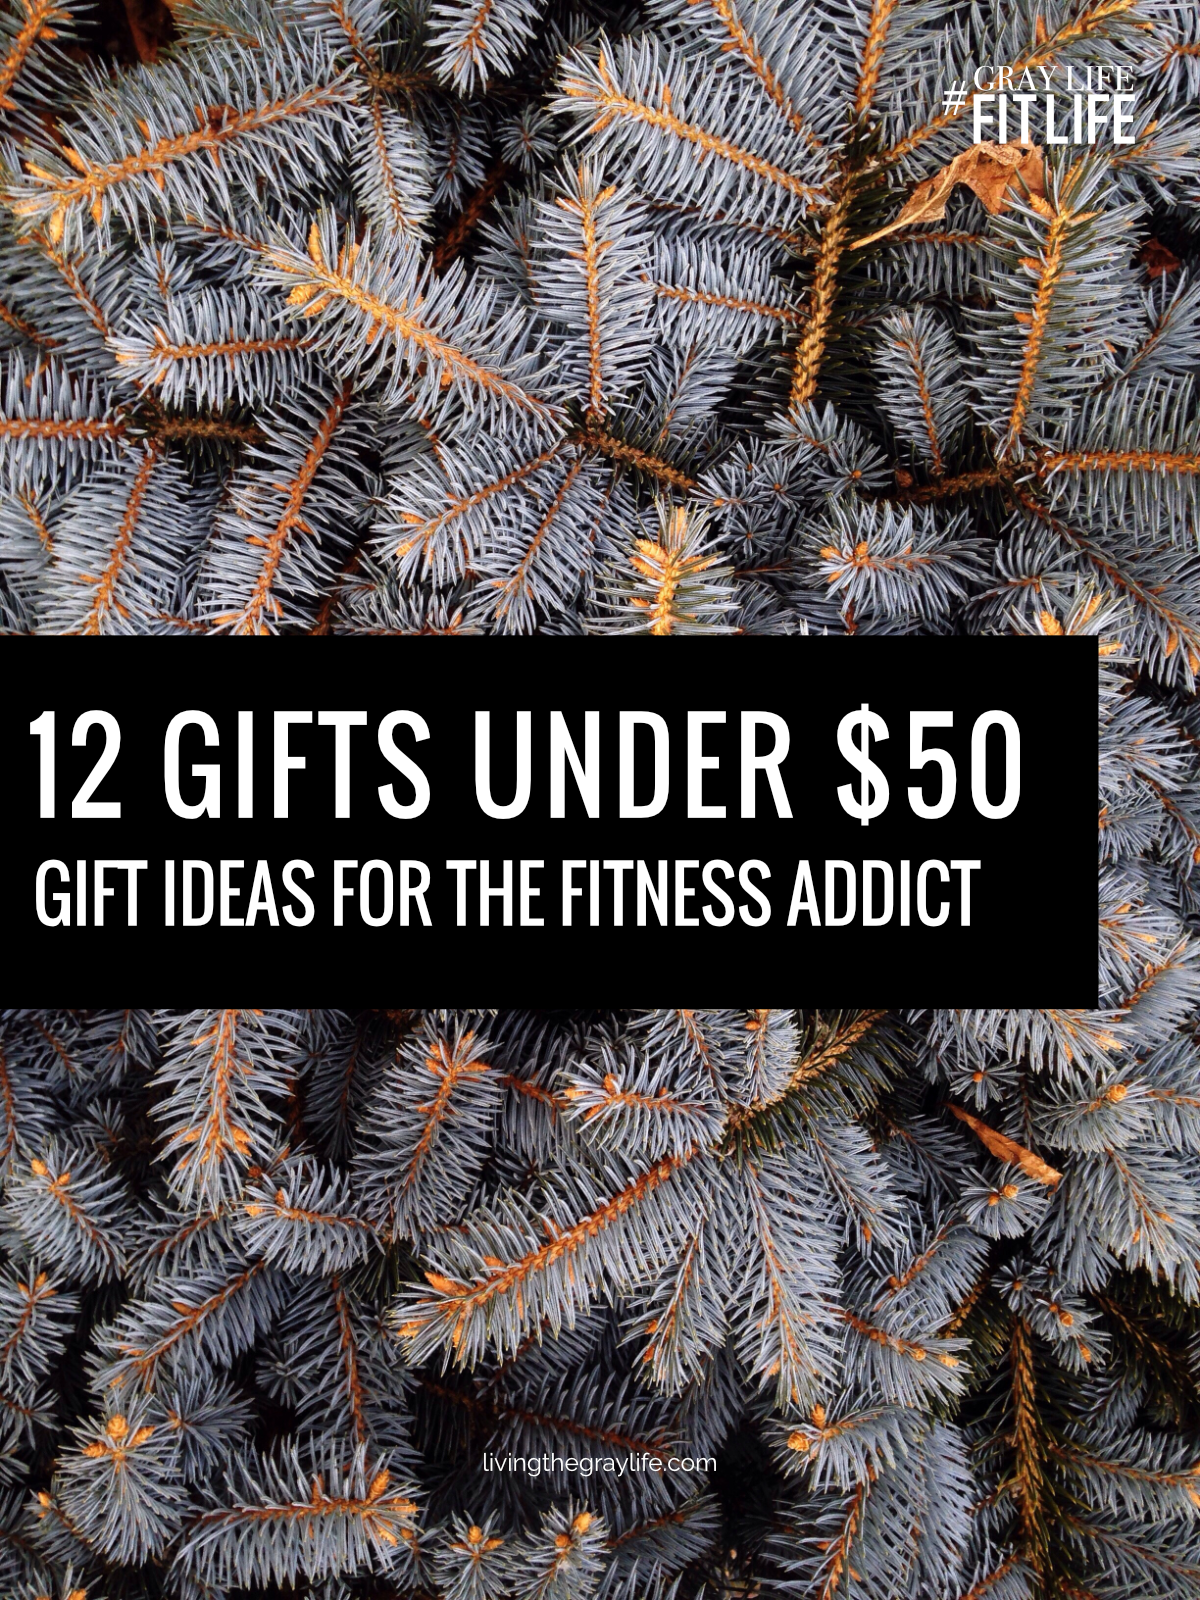 12 Gifts Under $50 | Gift Ideas for the Fitness Addict